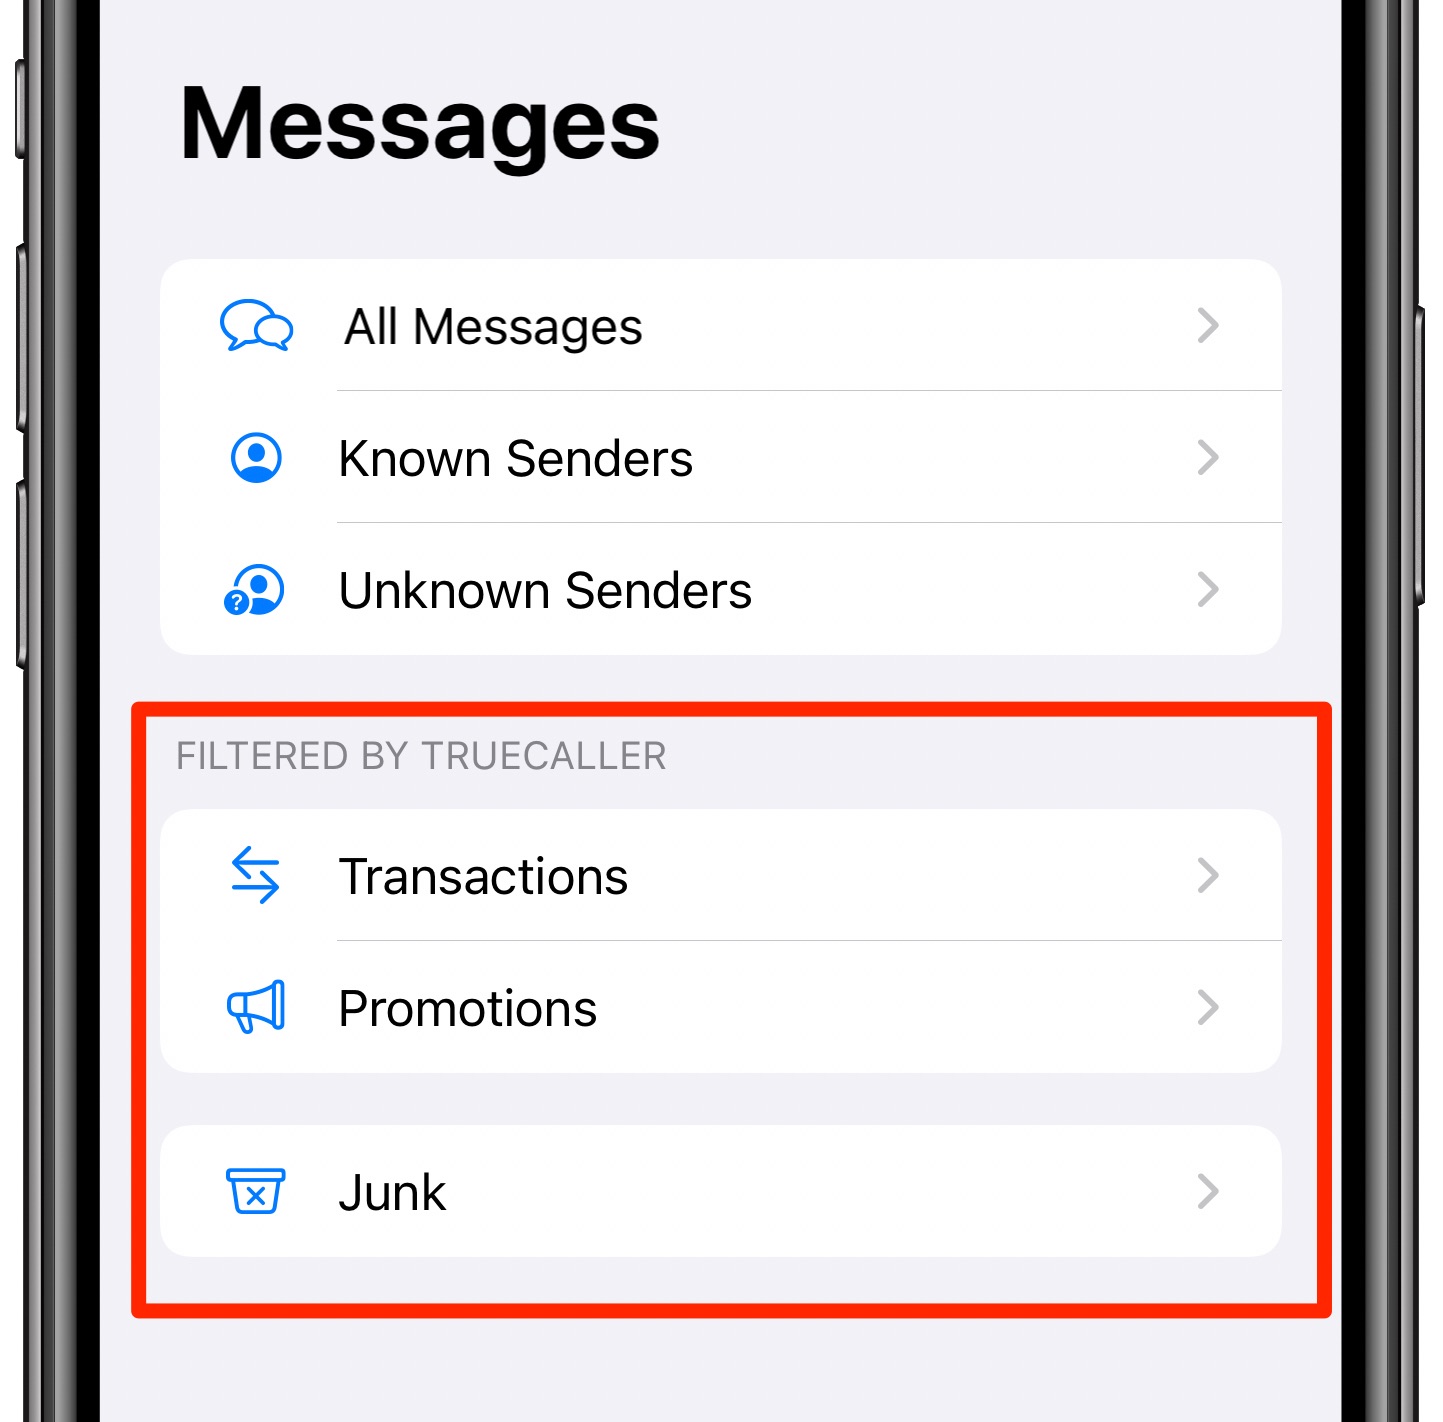 The SMS filtering section in Messages